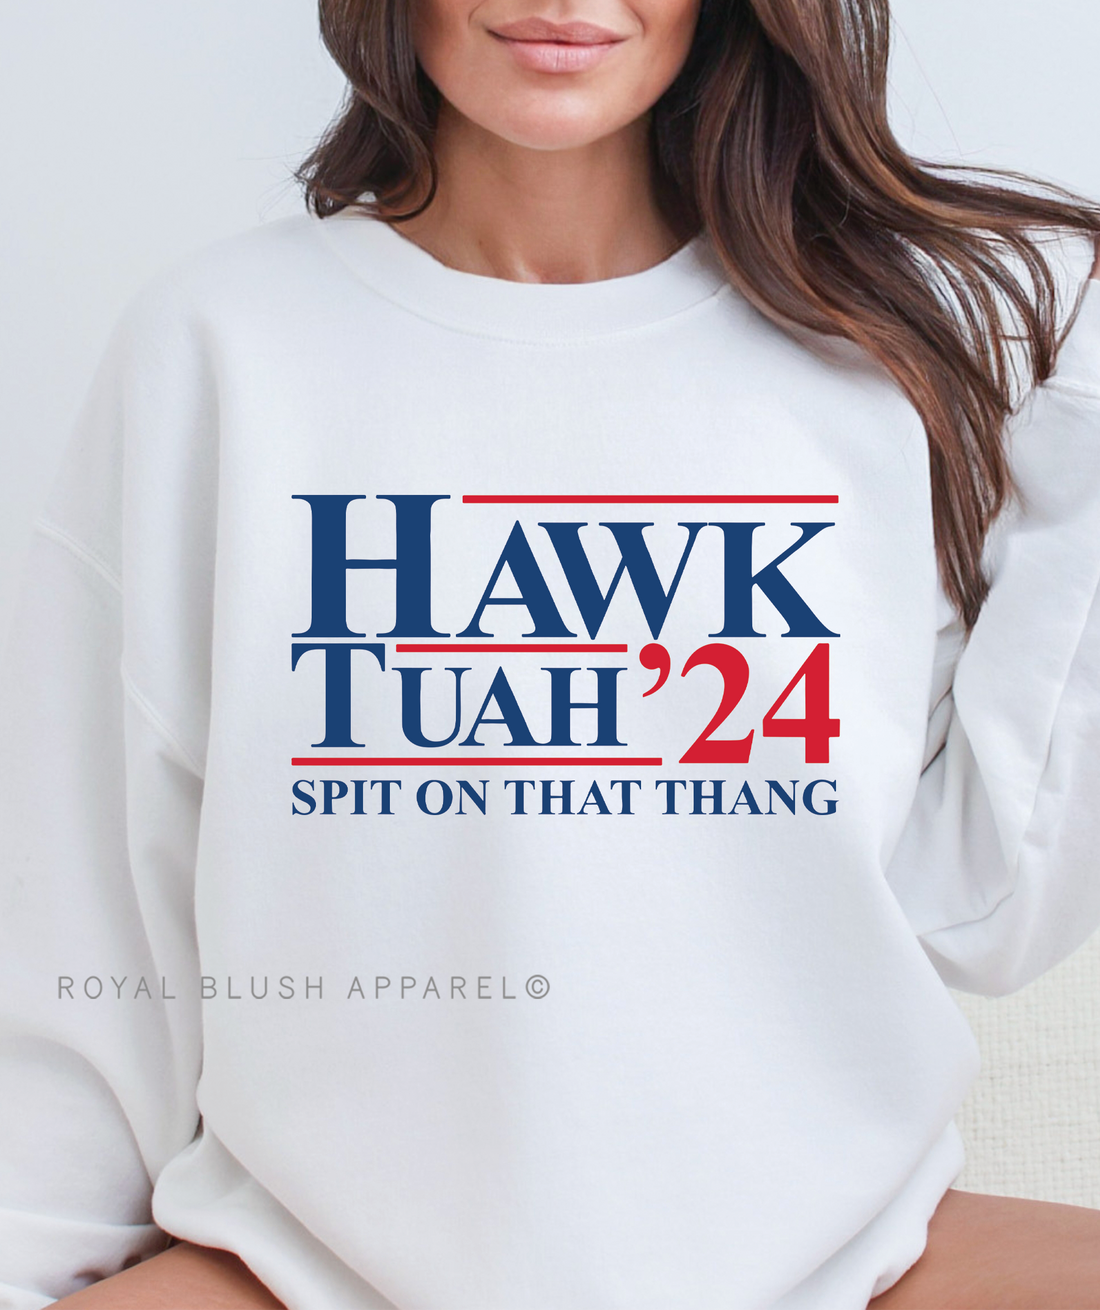 HAWK TUAH 2024, Spit on that thang Full Color Transfer